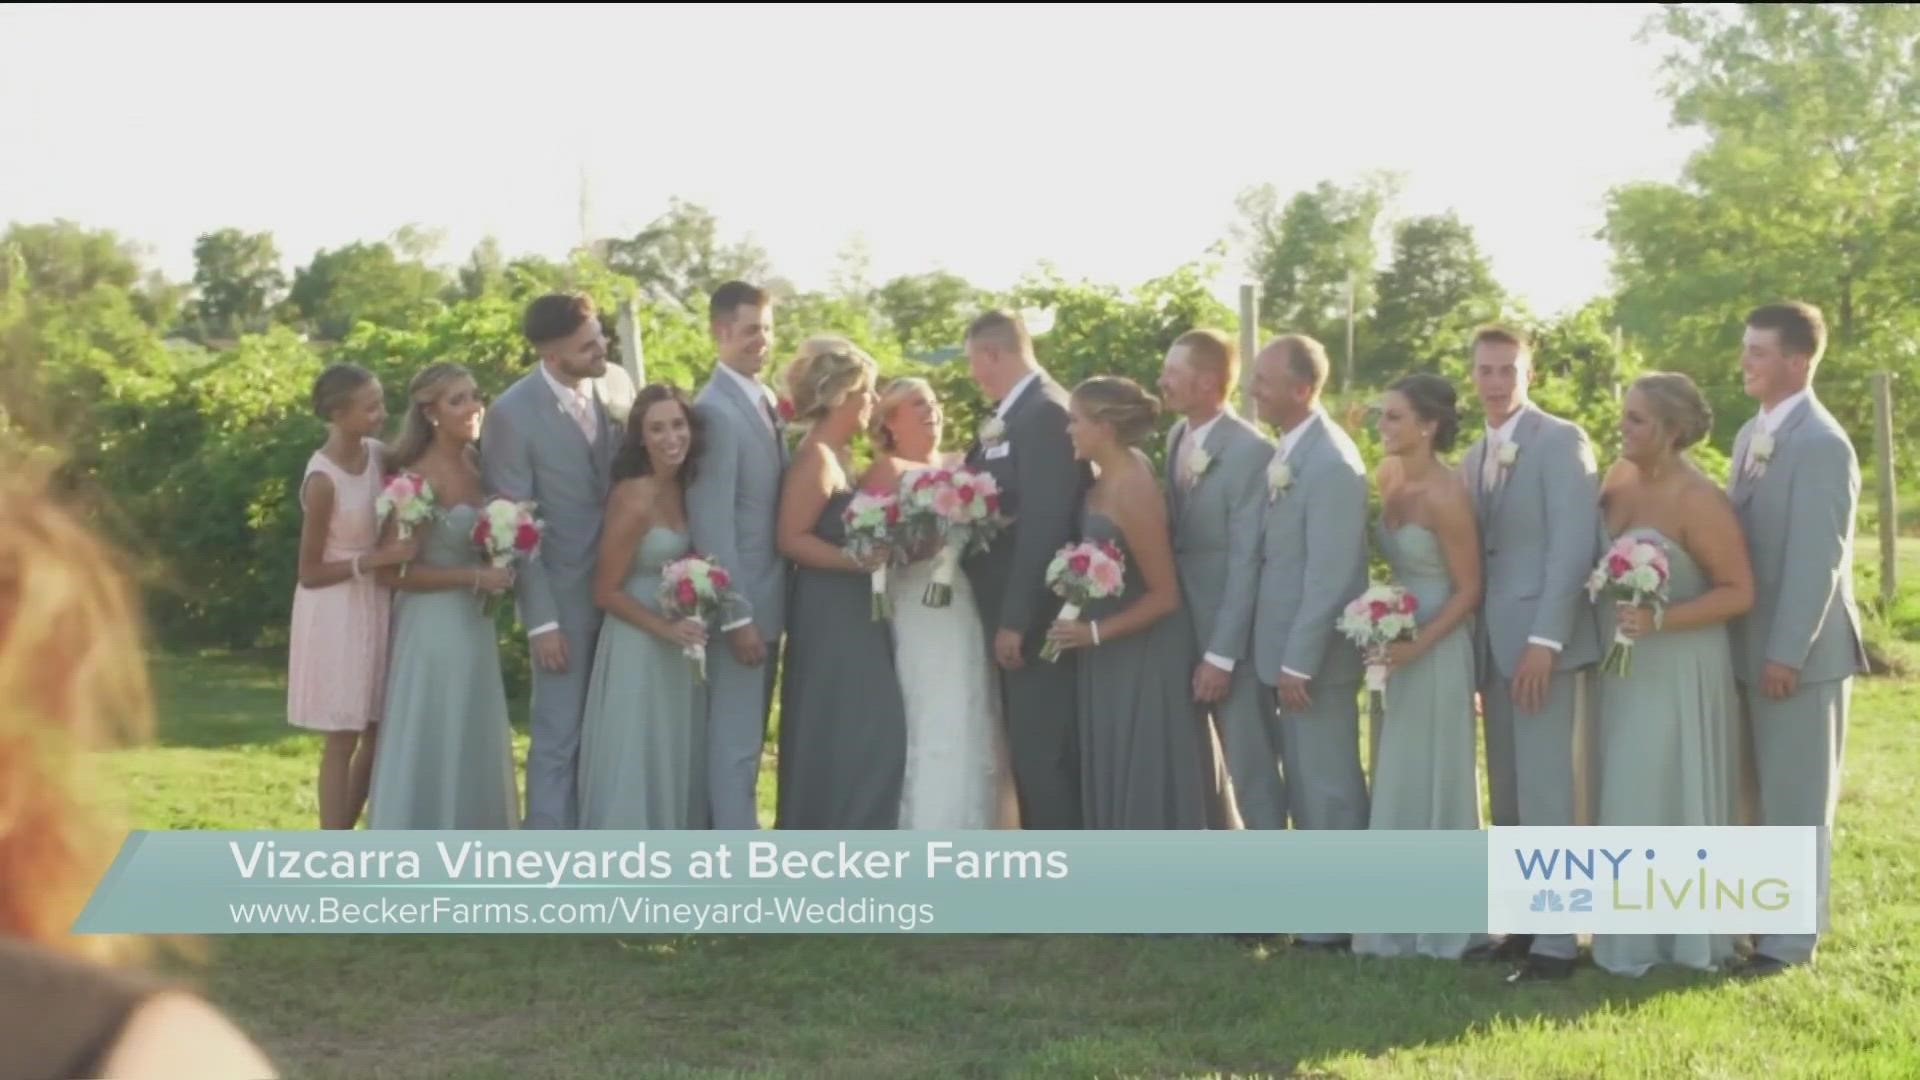 WNY Living - February 25 - Vizcarra Vineyards at Becker Farms (THIS VIDEO IS SPONSORED BY VIZCARRA VINEYARDS AT BECKER FARMS)